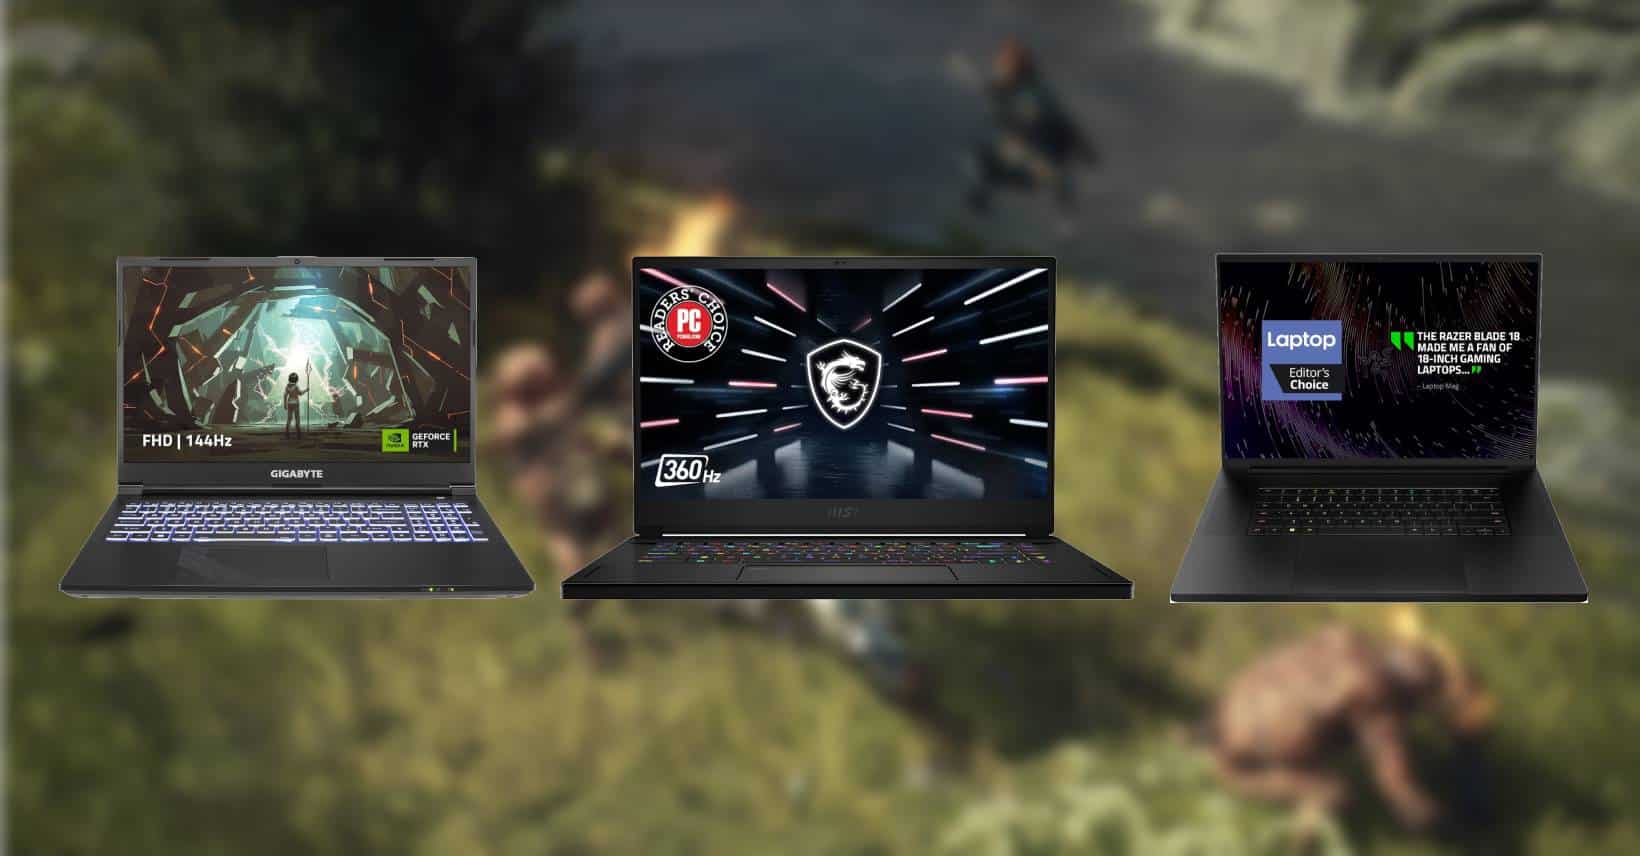 Three gaming laptops on a rocky surface, each displaying different gaming-related graphics including the best gaming laptop for Dragon's Dogma 2 on their screens.